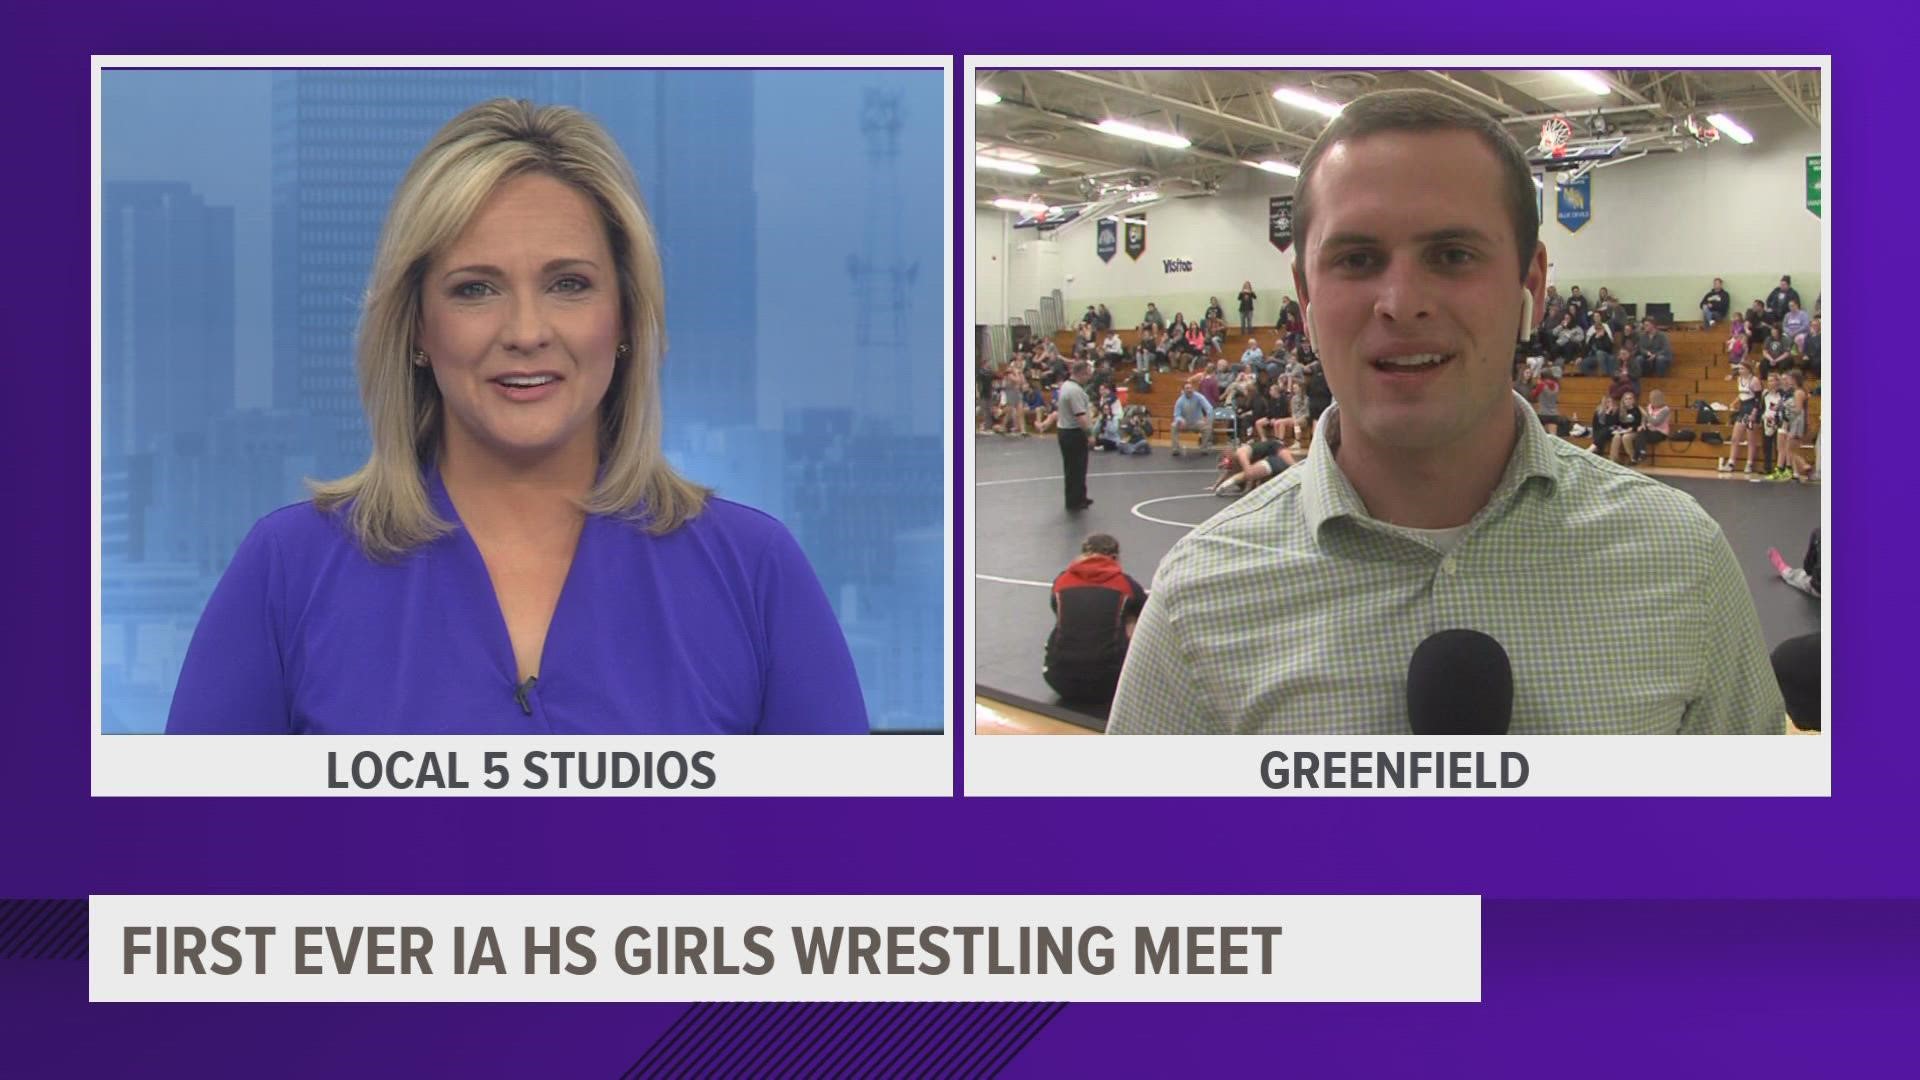 Iowa sanctioned girls high school wrestling earlier this year, and over 100 schools have since created teams to compete.